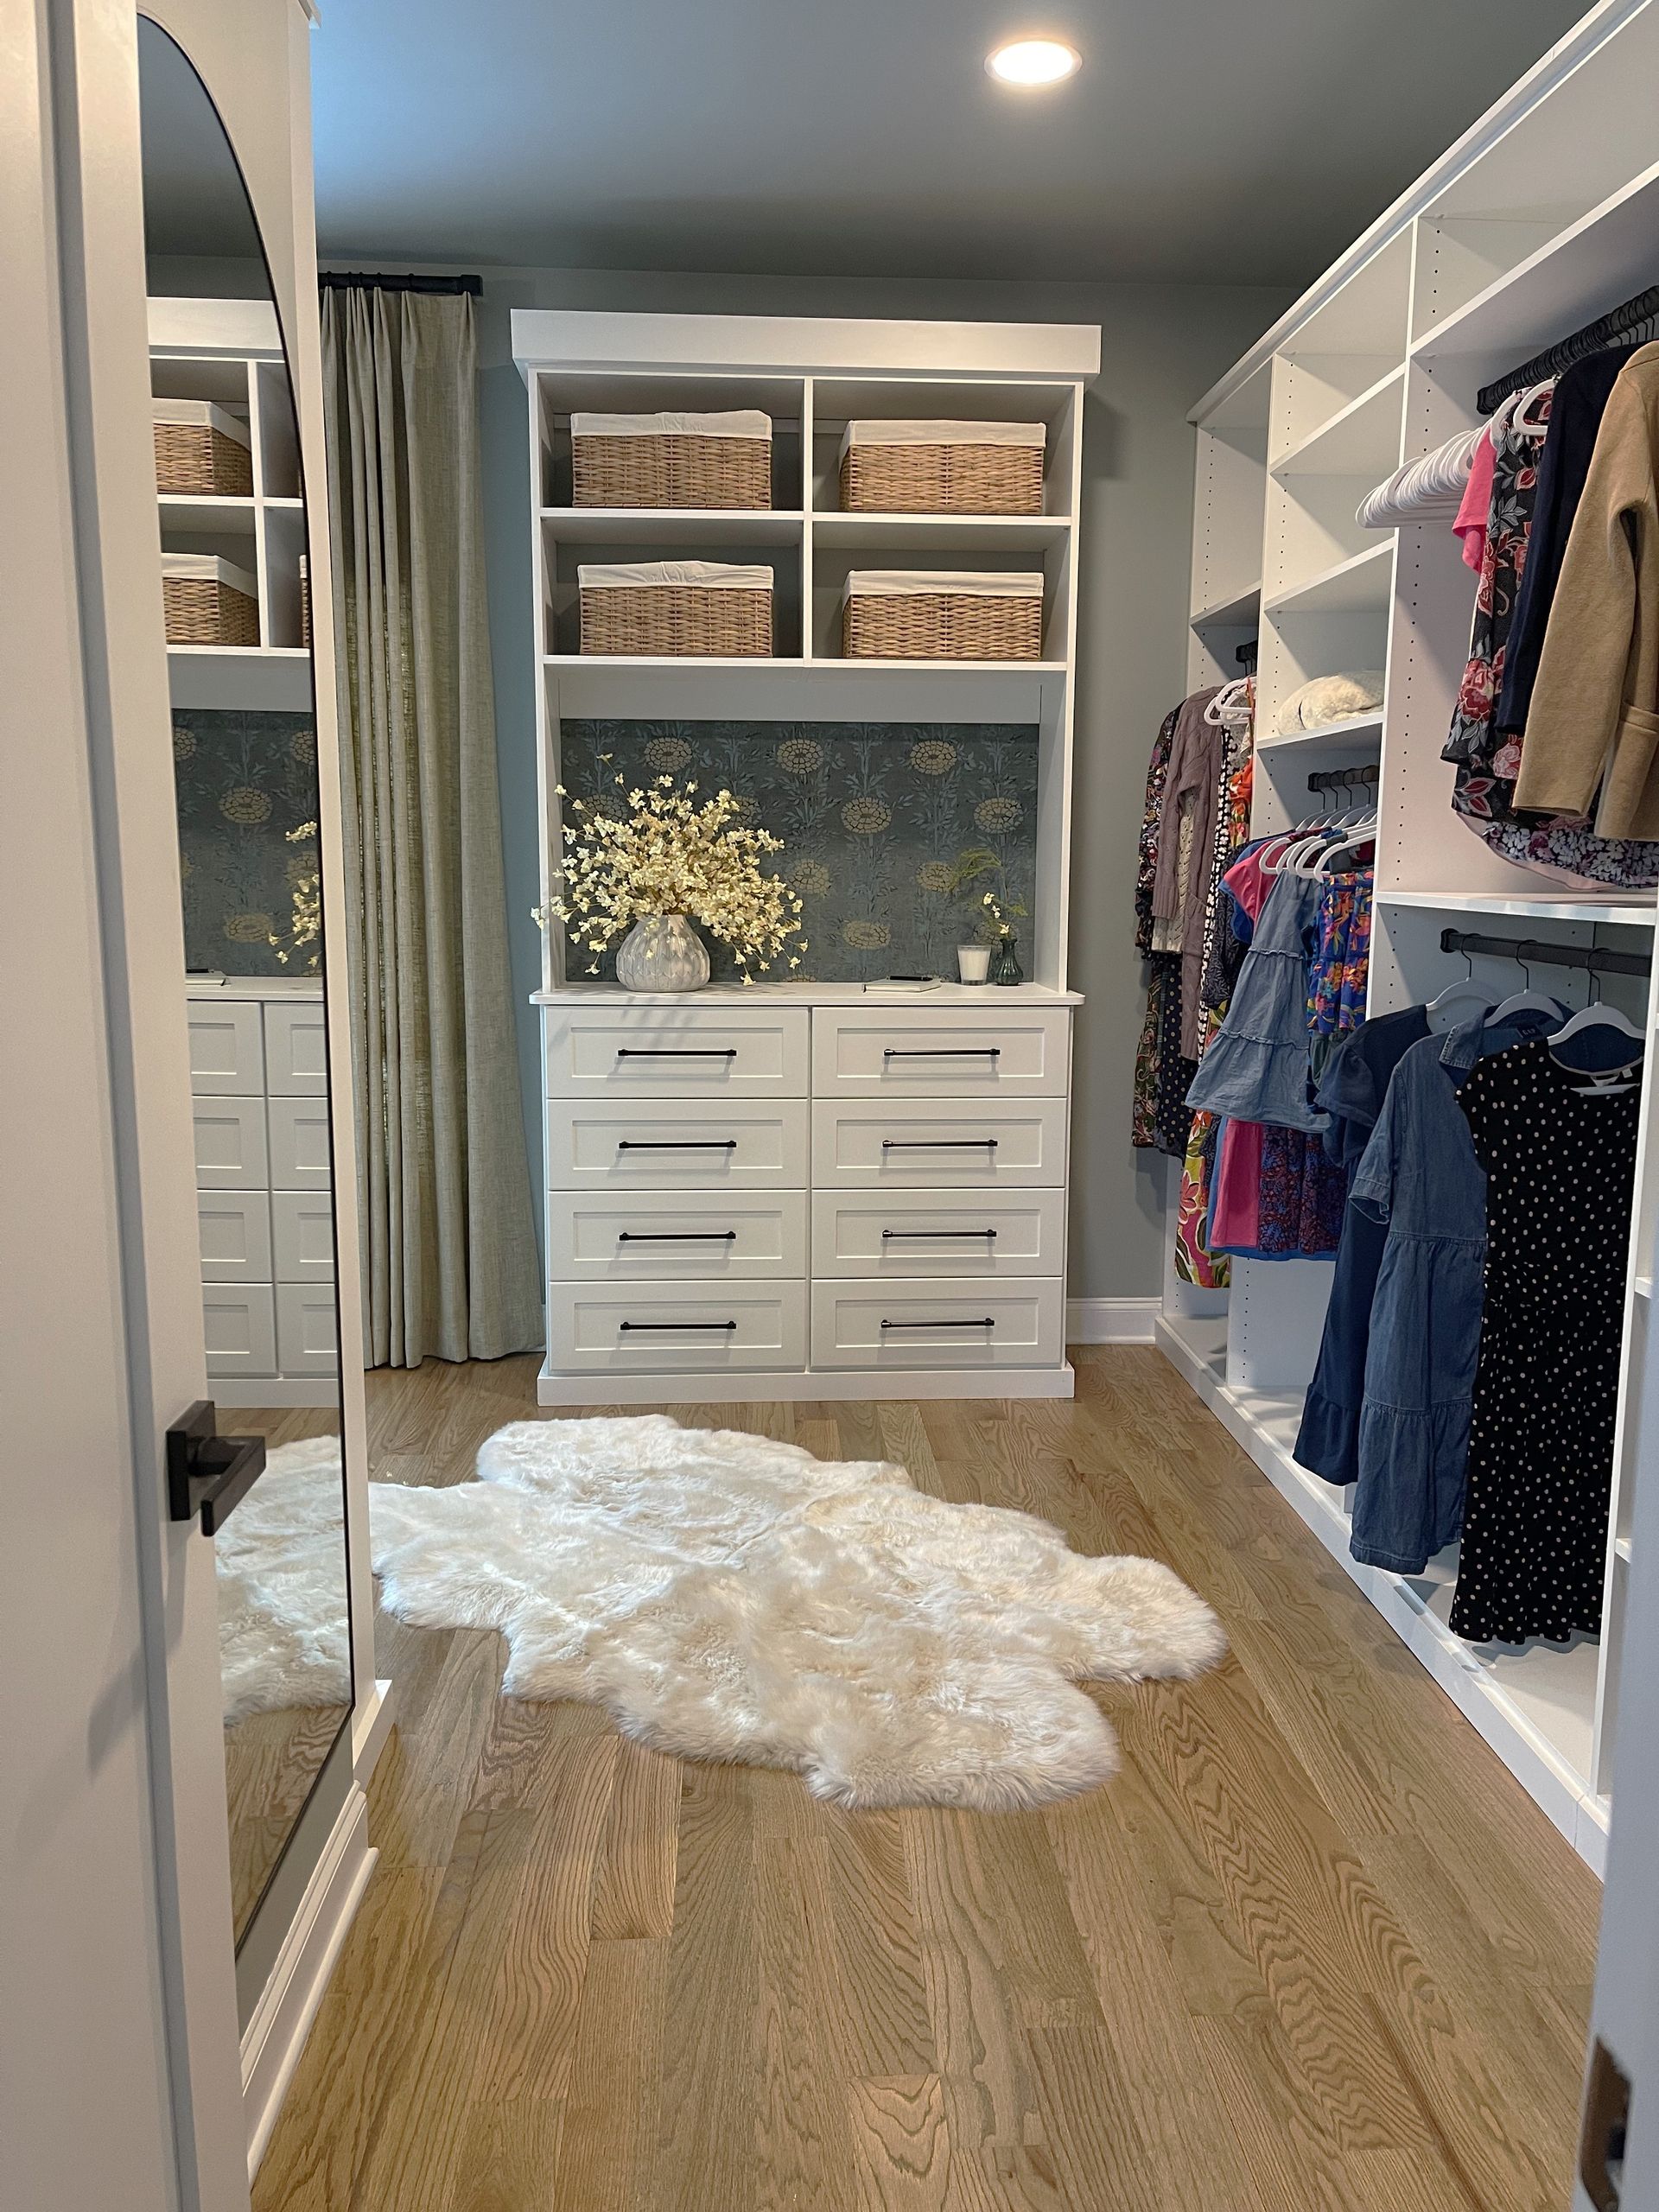 A walk in closet with lots of clothes and a rug on the floor.